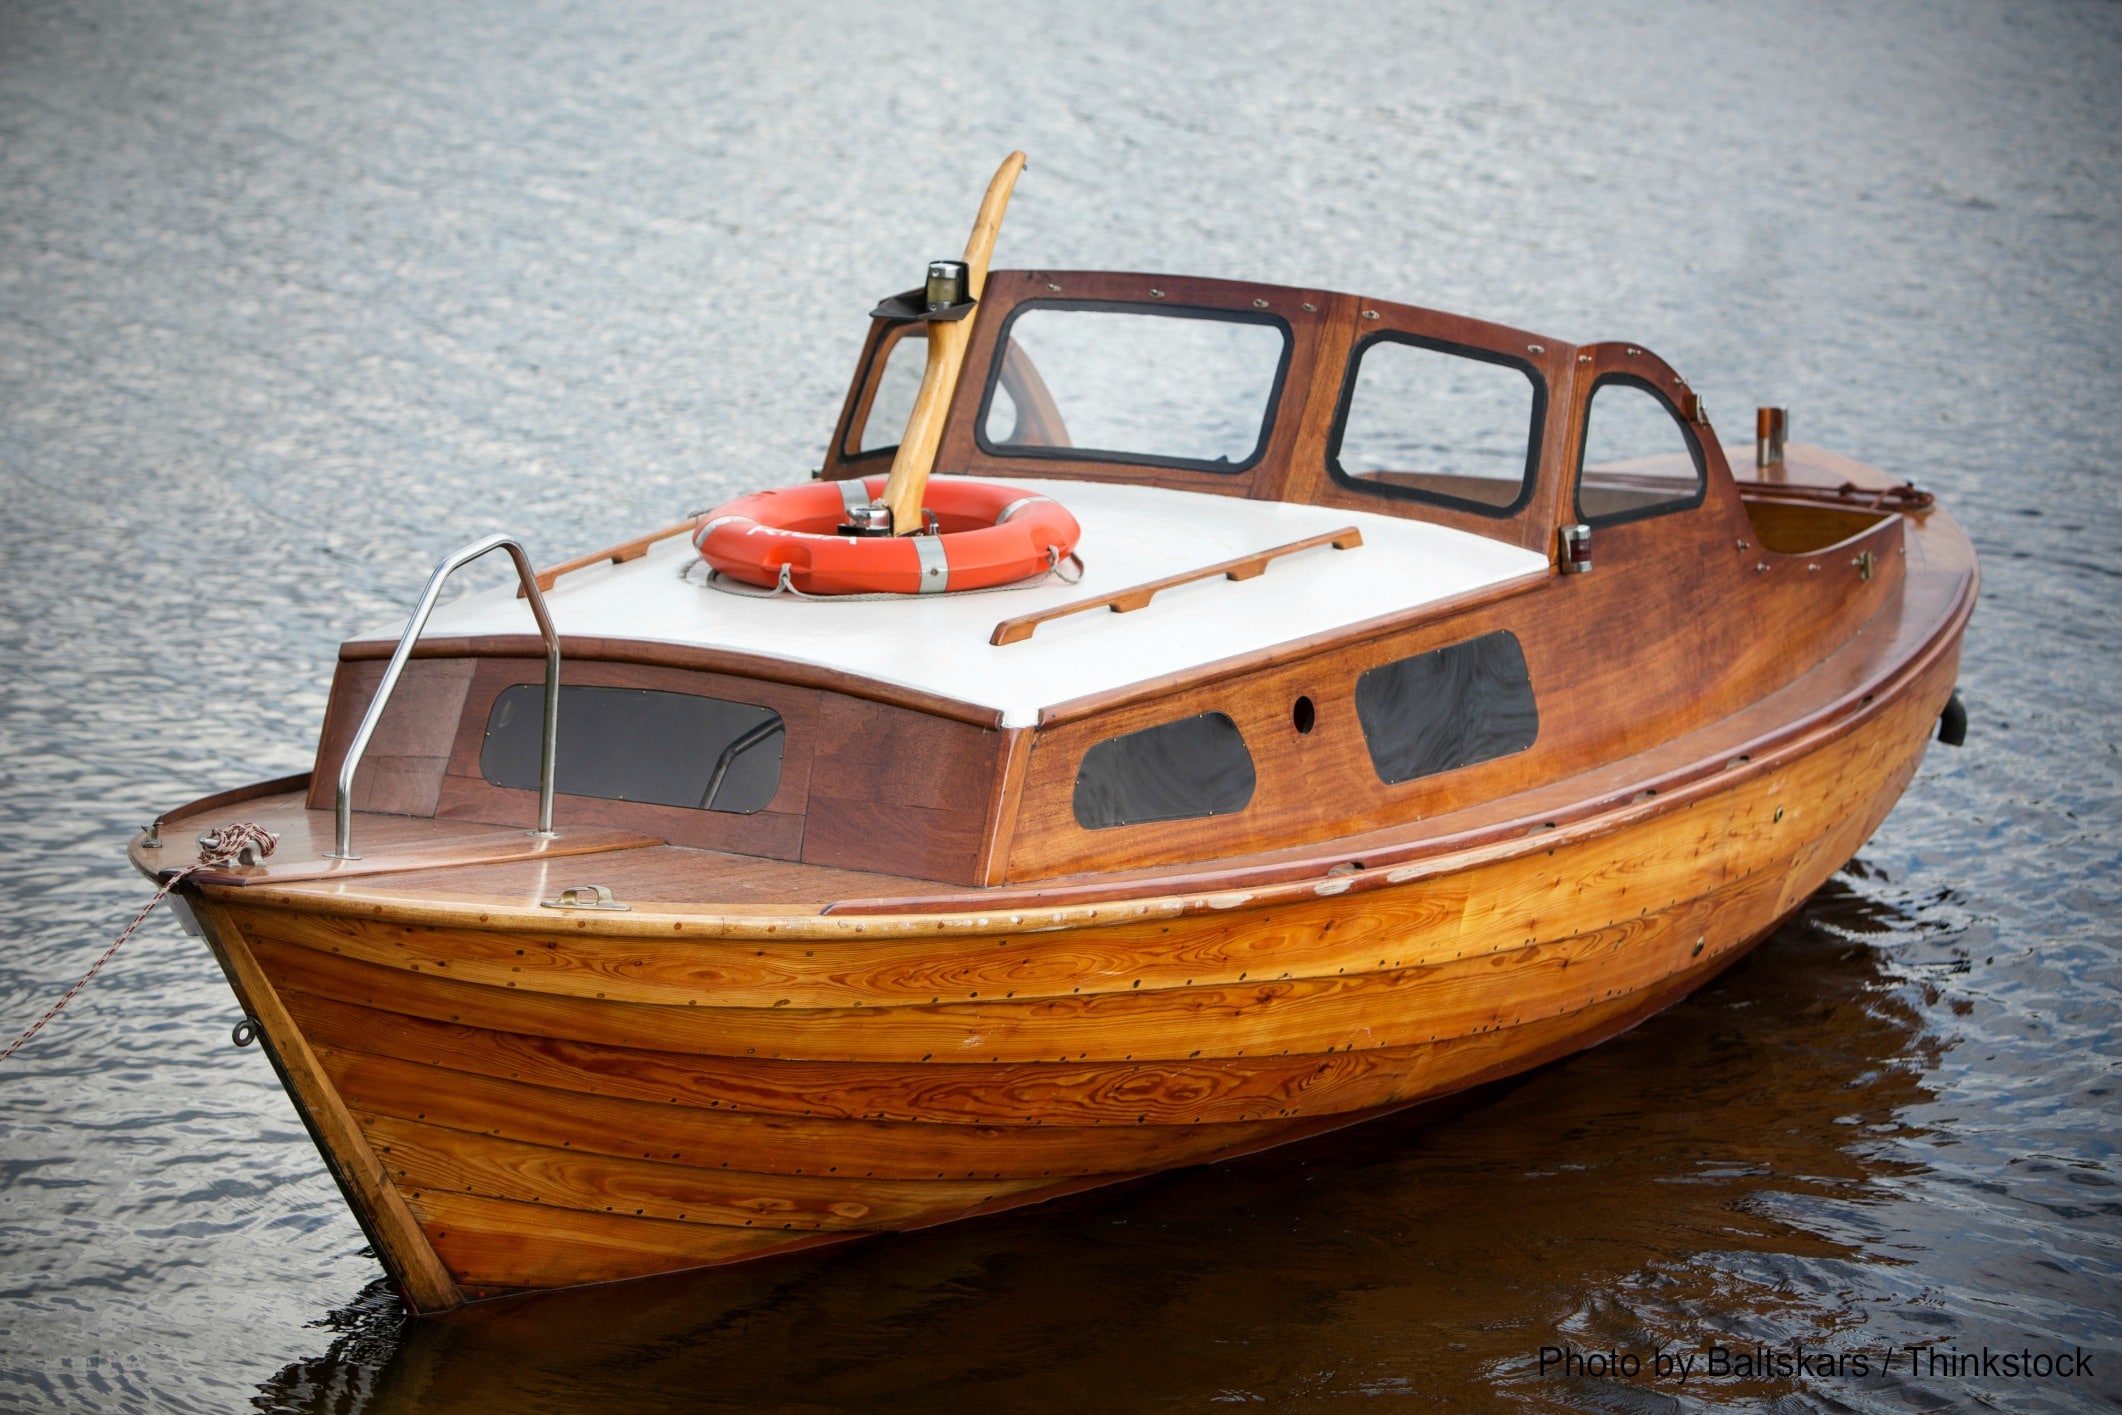 Everything You Need to Know about the Wooden Boat Show in 